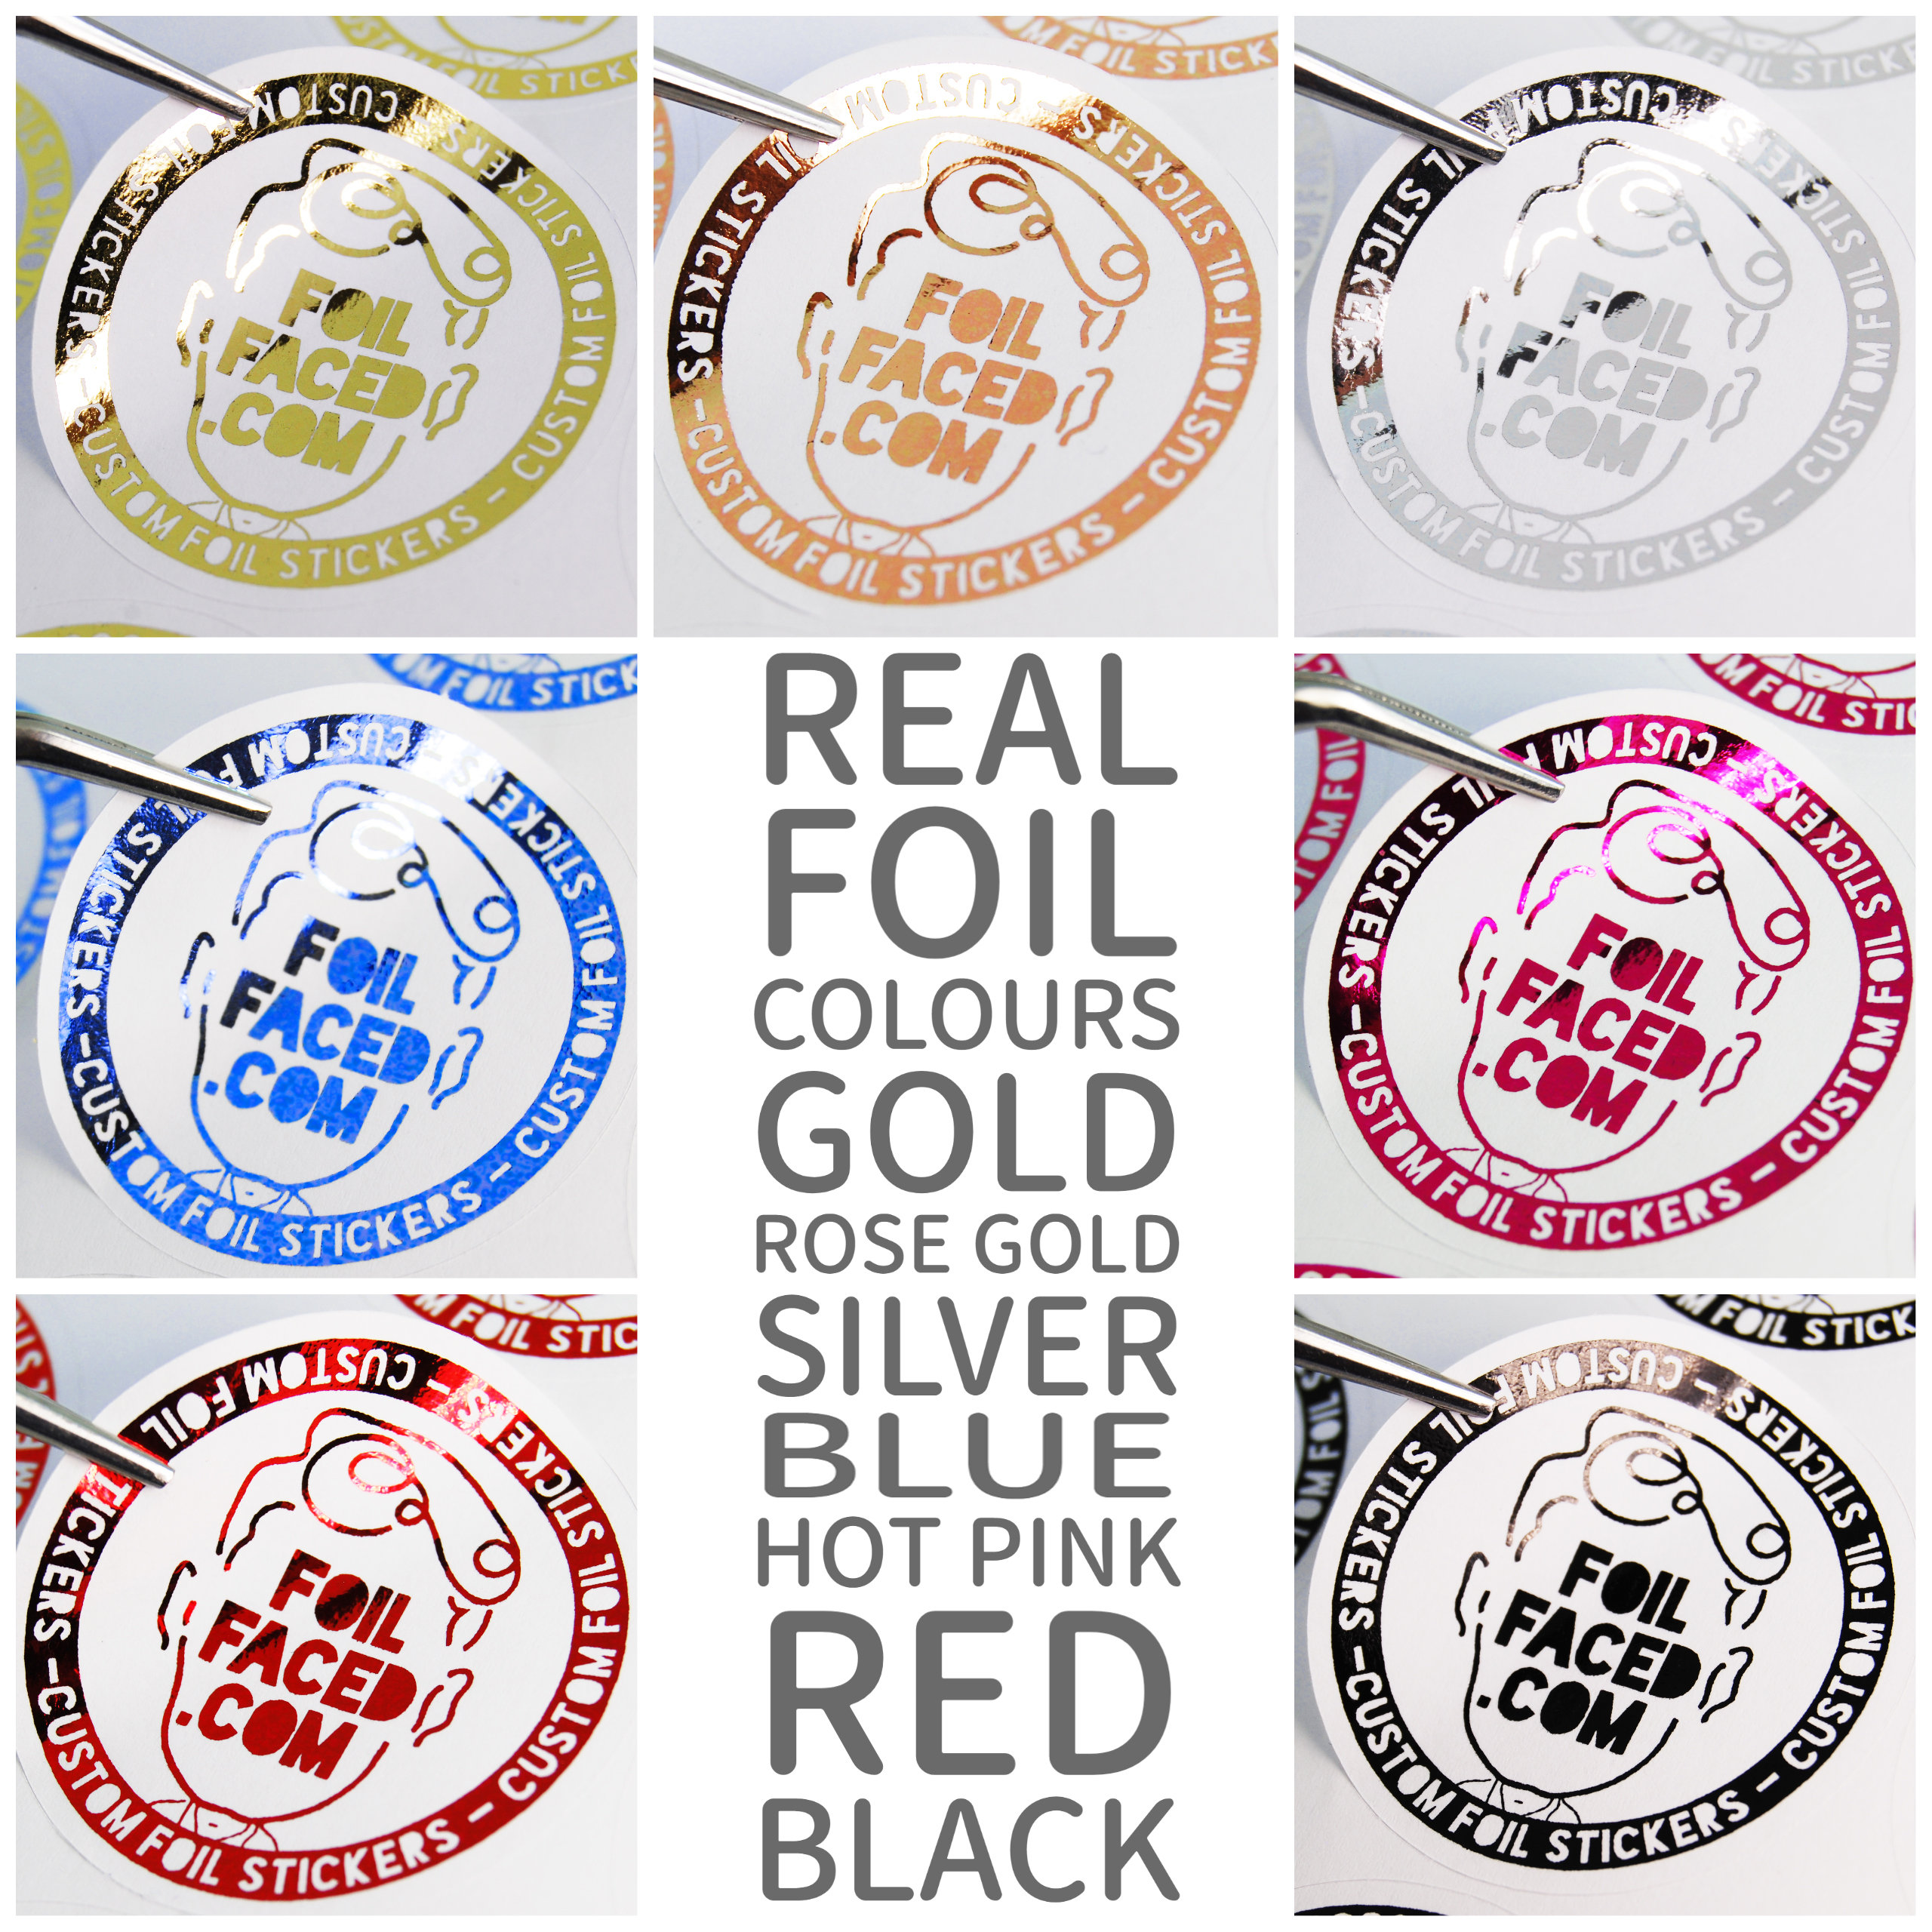 Custom Hot Foil Stamped Stickers Personalized with your logo, artwork or  design